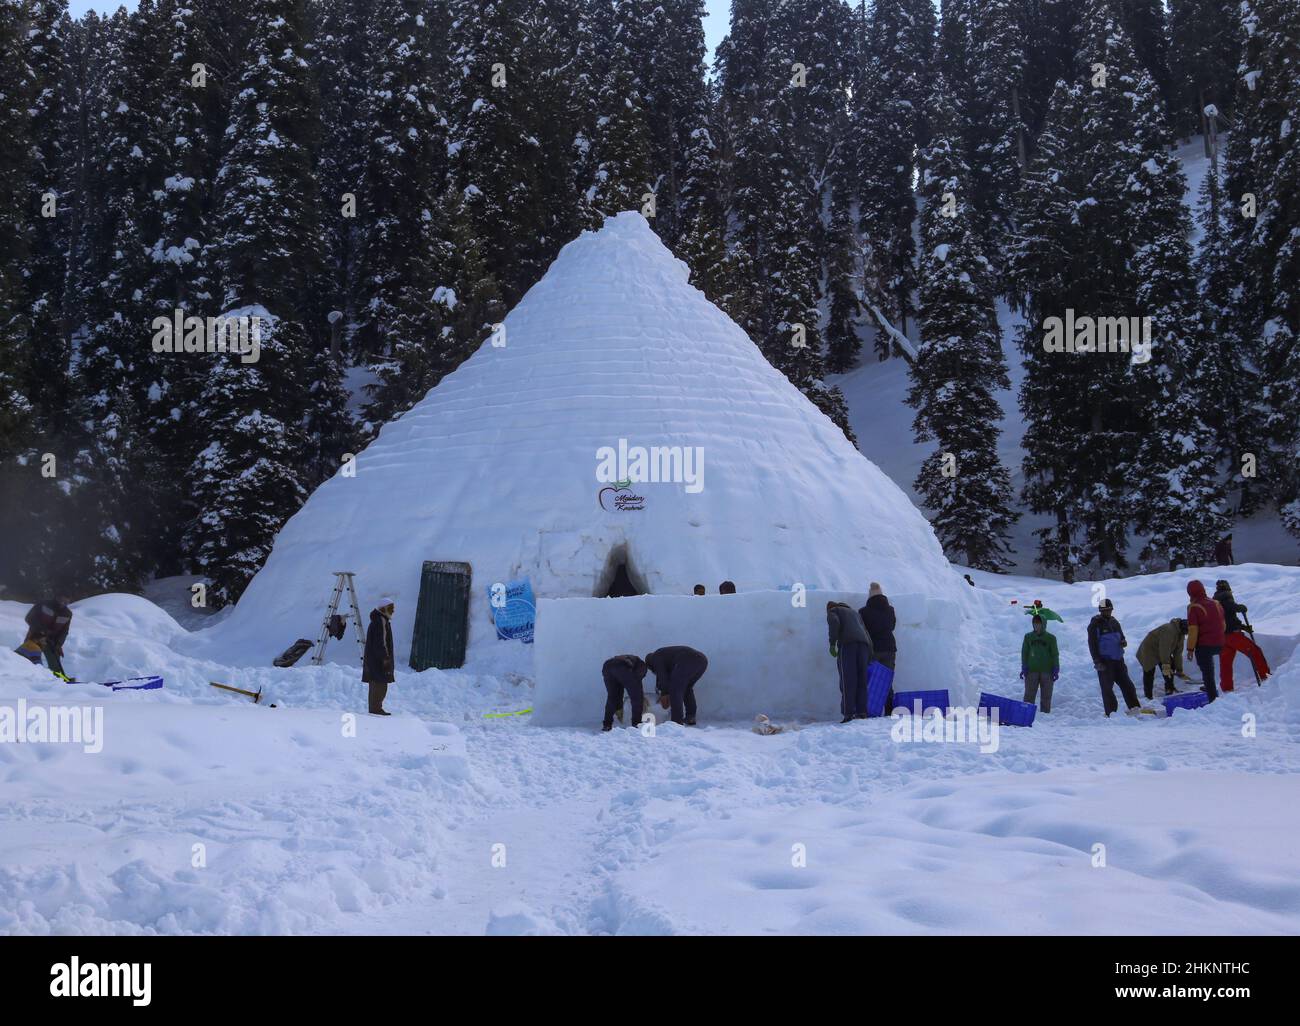 Srinagar, India. 05th Feb, 2022. A Outside view of Asia's biggest Igloo café in famous ski resort gulmarg. The Igloo Cafe is approximately 37.5 feet tall and 45 feet round and can accommodate fifteen tables and around 60 guests. The Igloo Cafe offers tables made of ice and snow, with hot dishes served to visitors. (Photo by Sajad Hameed/Pacific Press) Credit: Pacific Press Media Production Corp./Alamy Live News Stock Photo